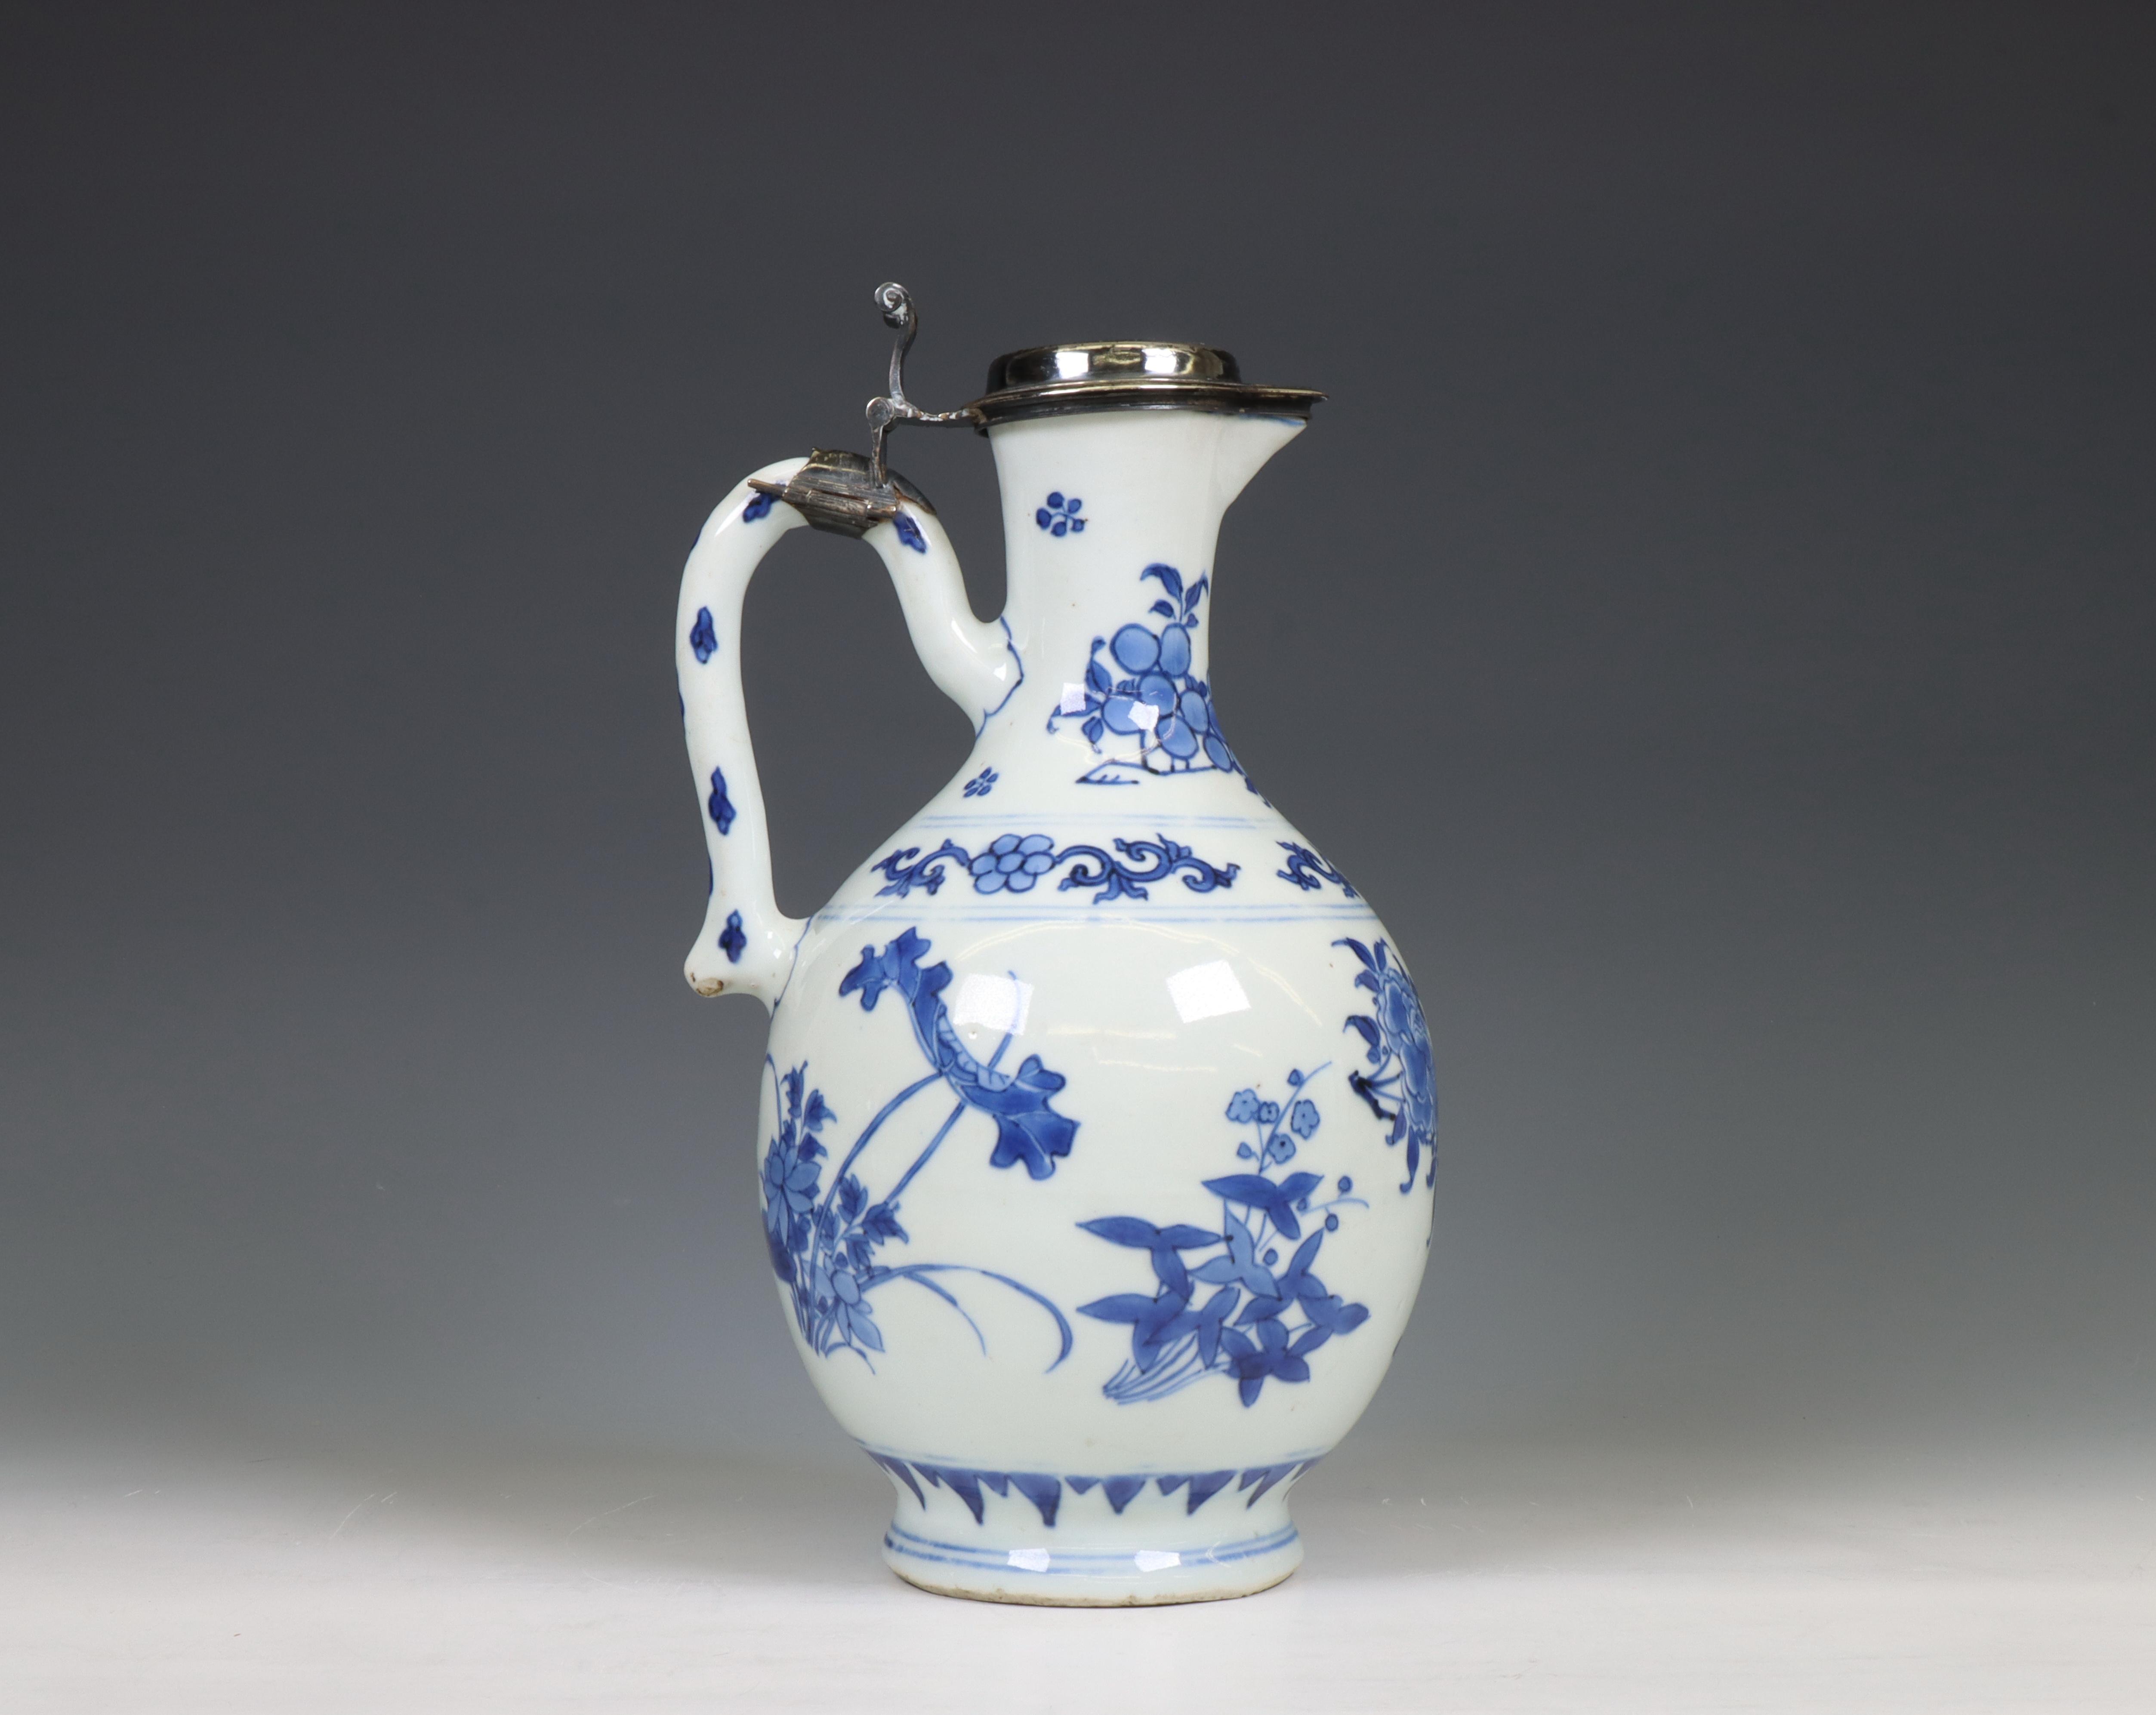 China, a Transitional silver-mounted blue and white porcelain ewer, mid 17th century, the silver lat - Image 2 of 6